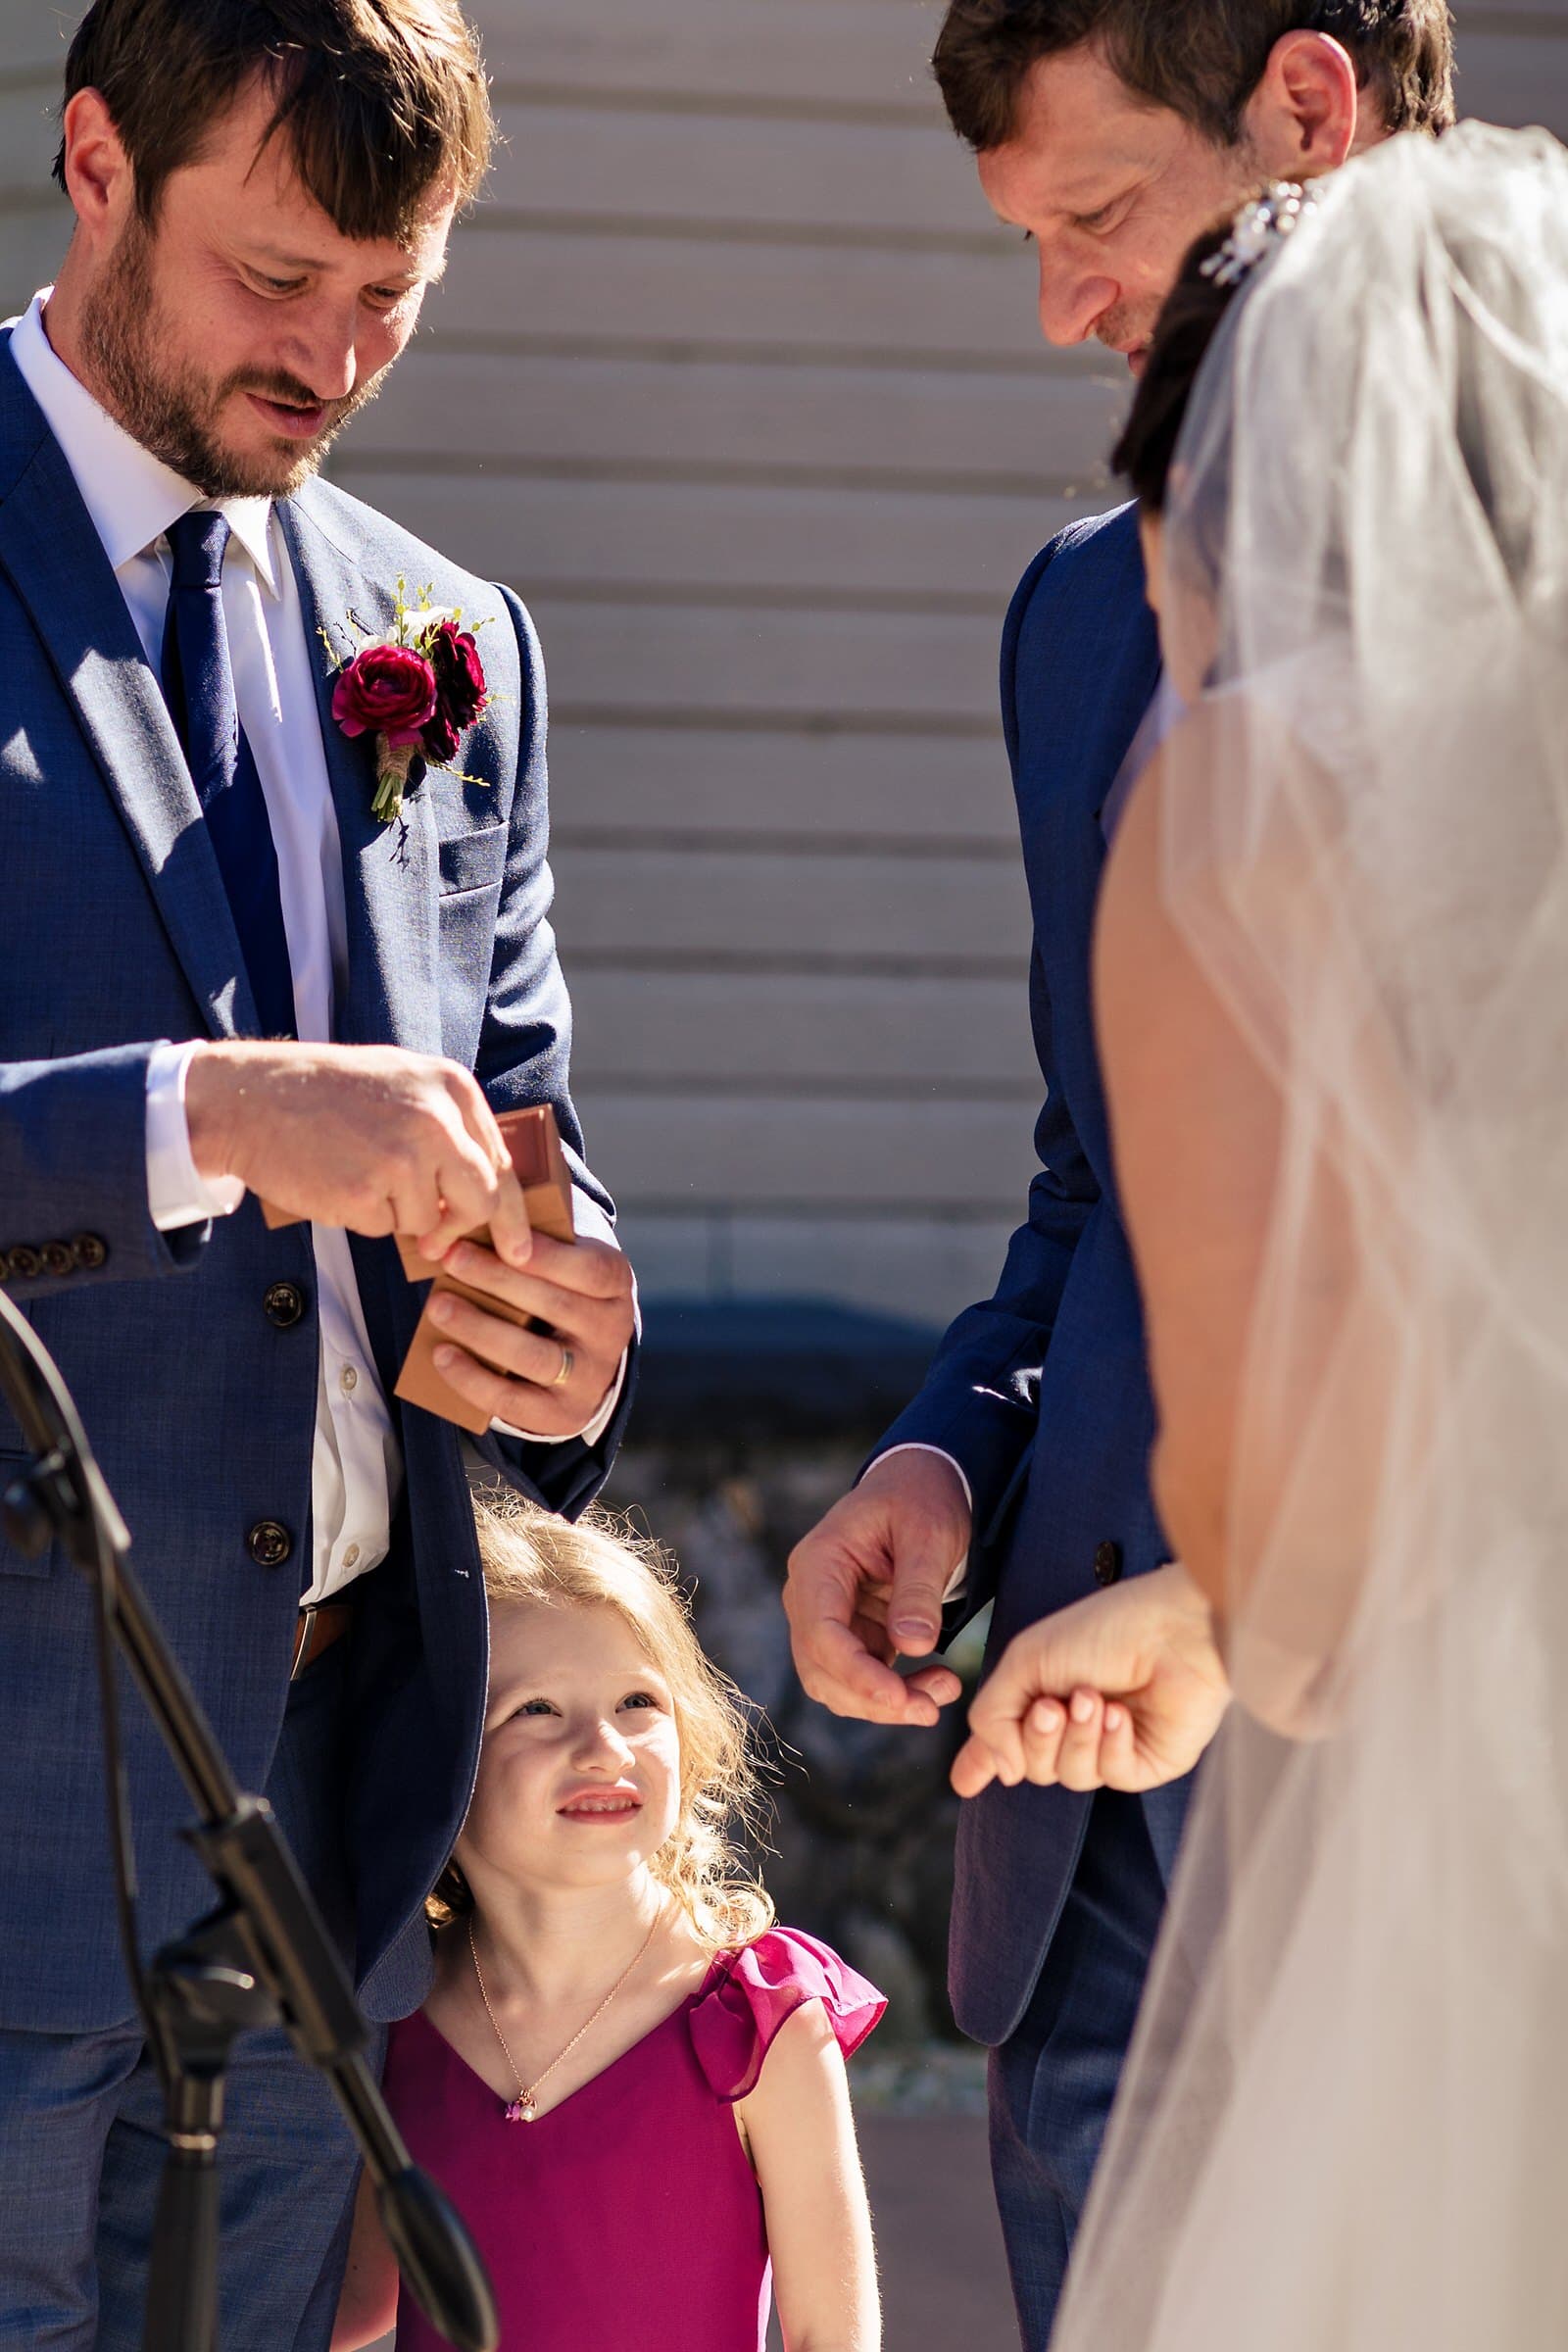 Best Man's daughter looks on as he hands over the rings during this wedding ceremony